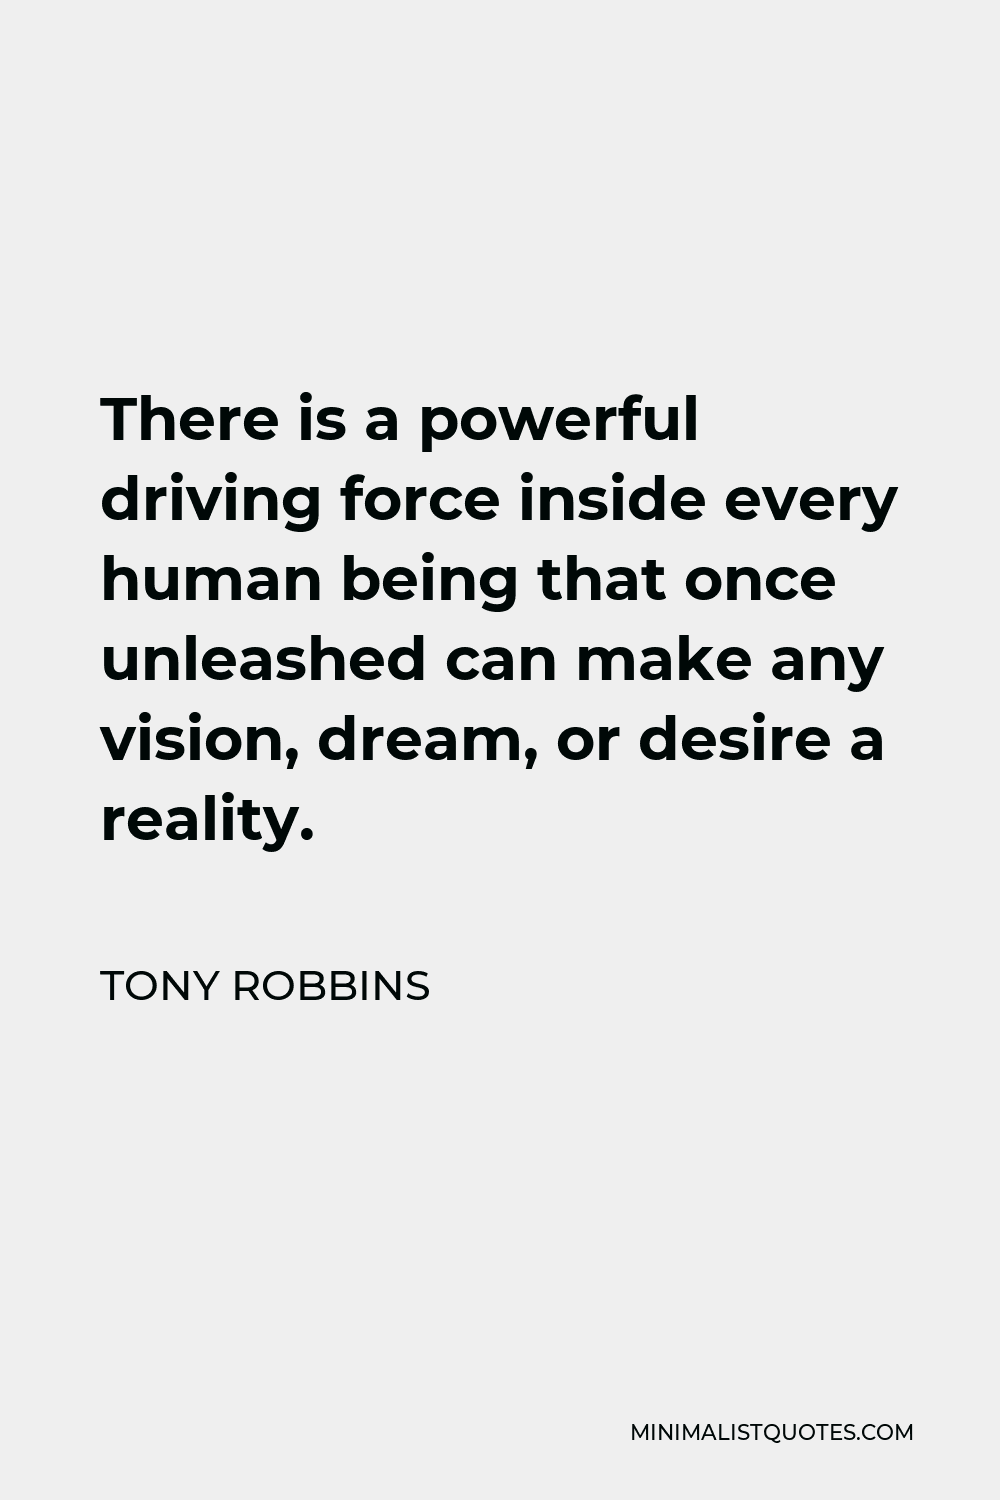 Tony Robbins Quote - There is a powerful driving force inside every human being that once unleashed can make any vision, dream, or desire a reality.